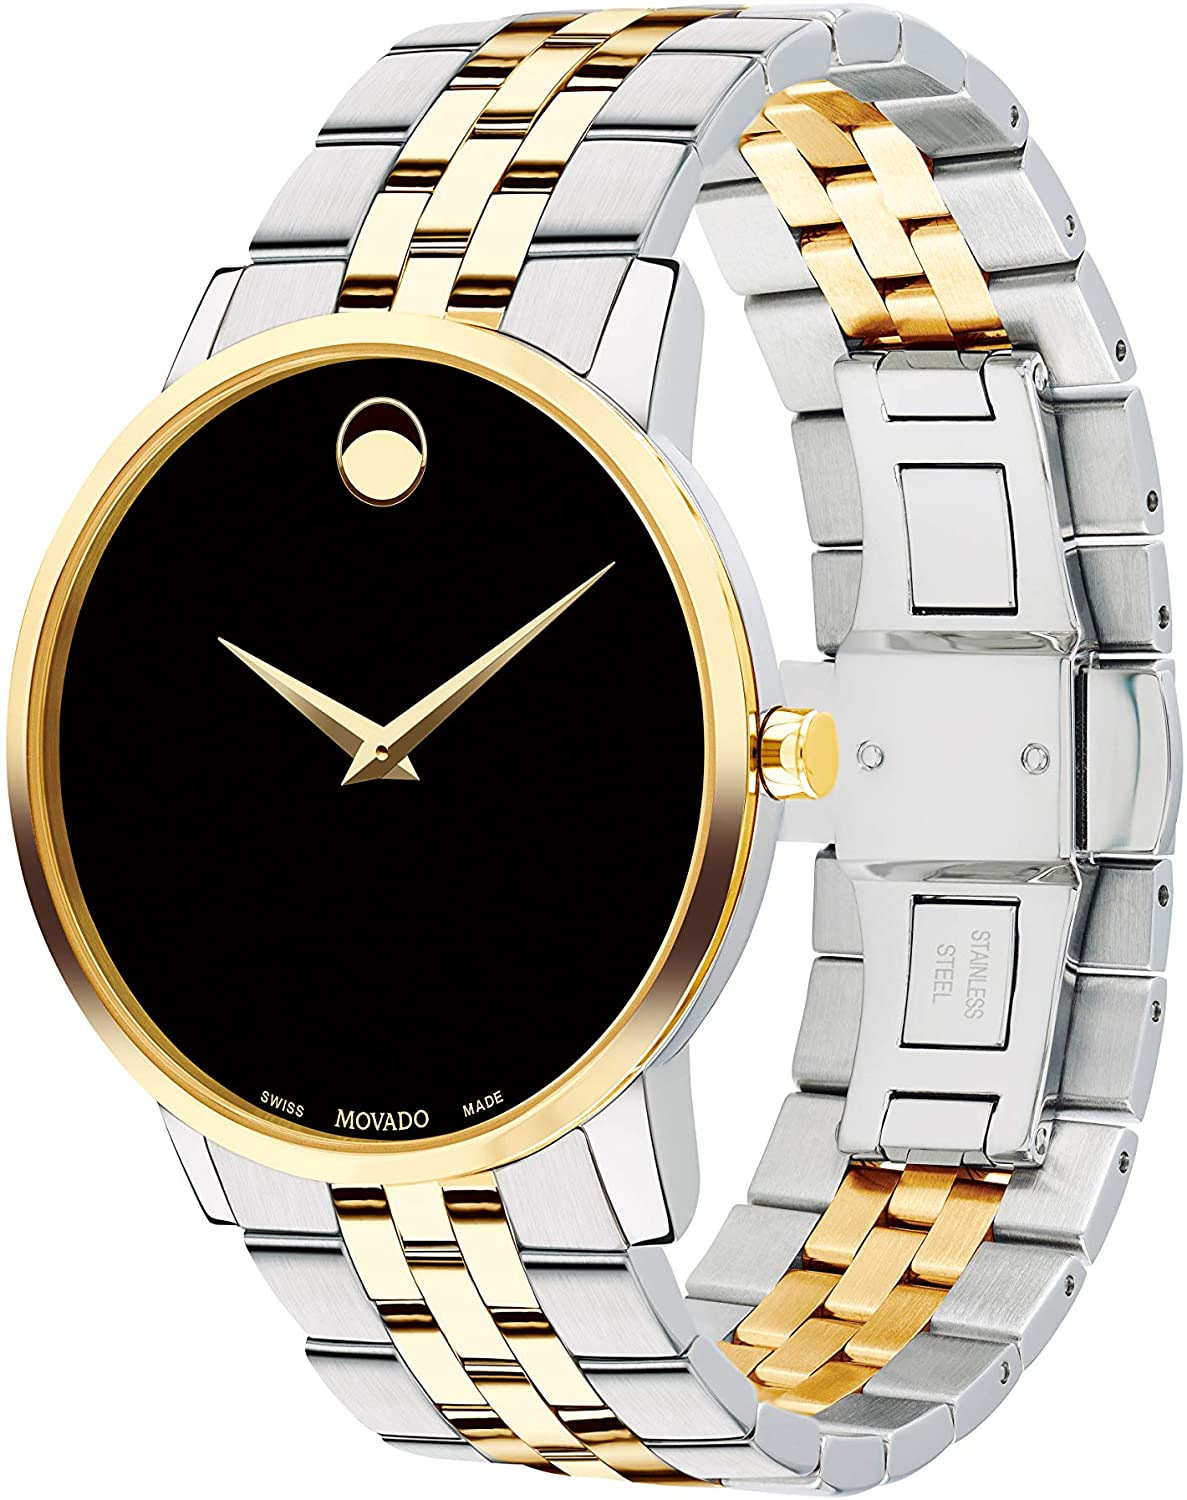 Museum Classic Two-Tone | Movado | Luby 